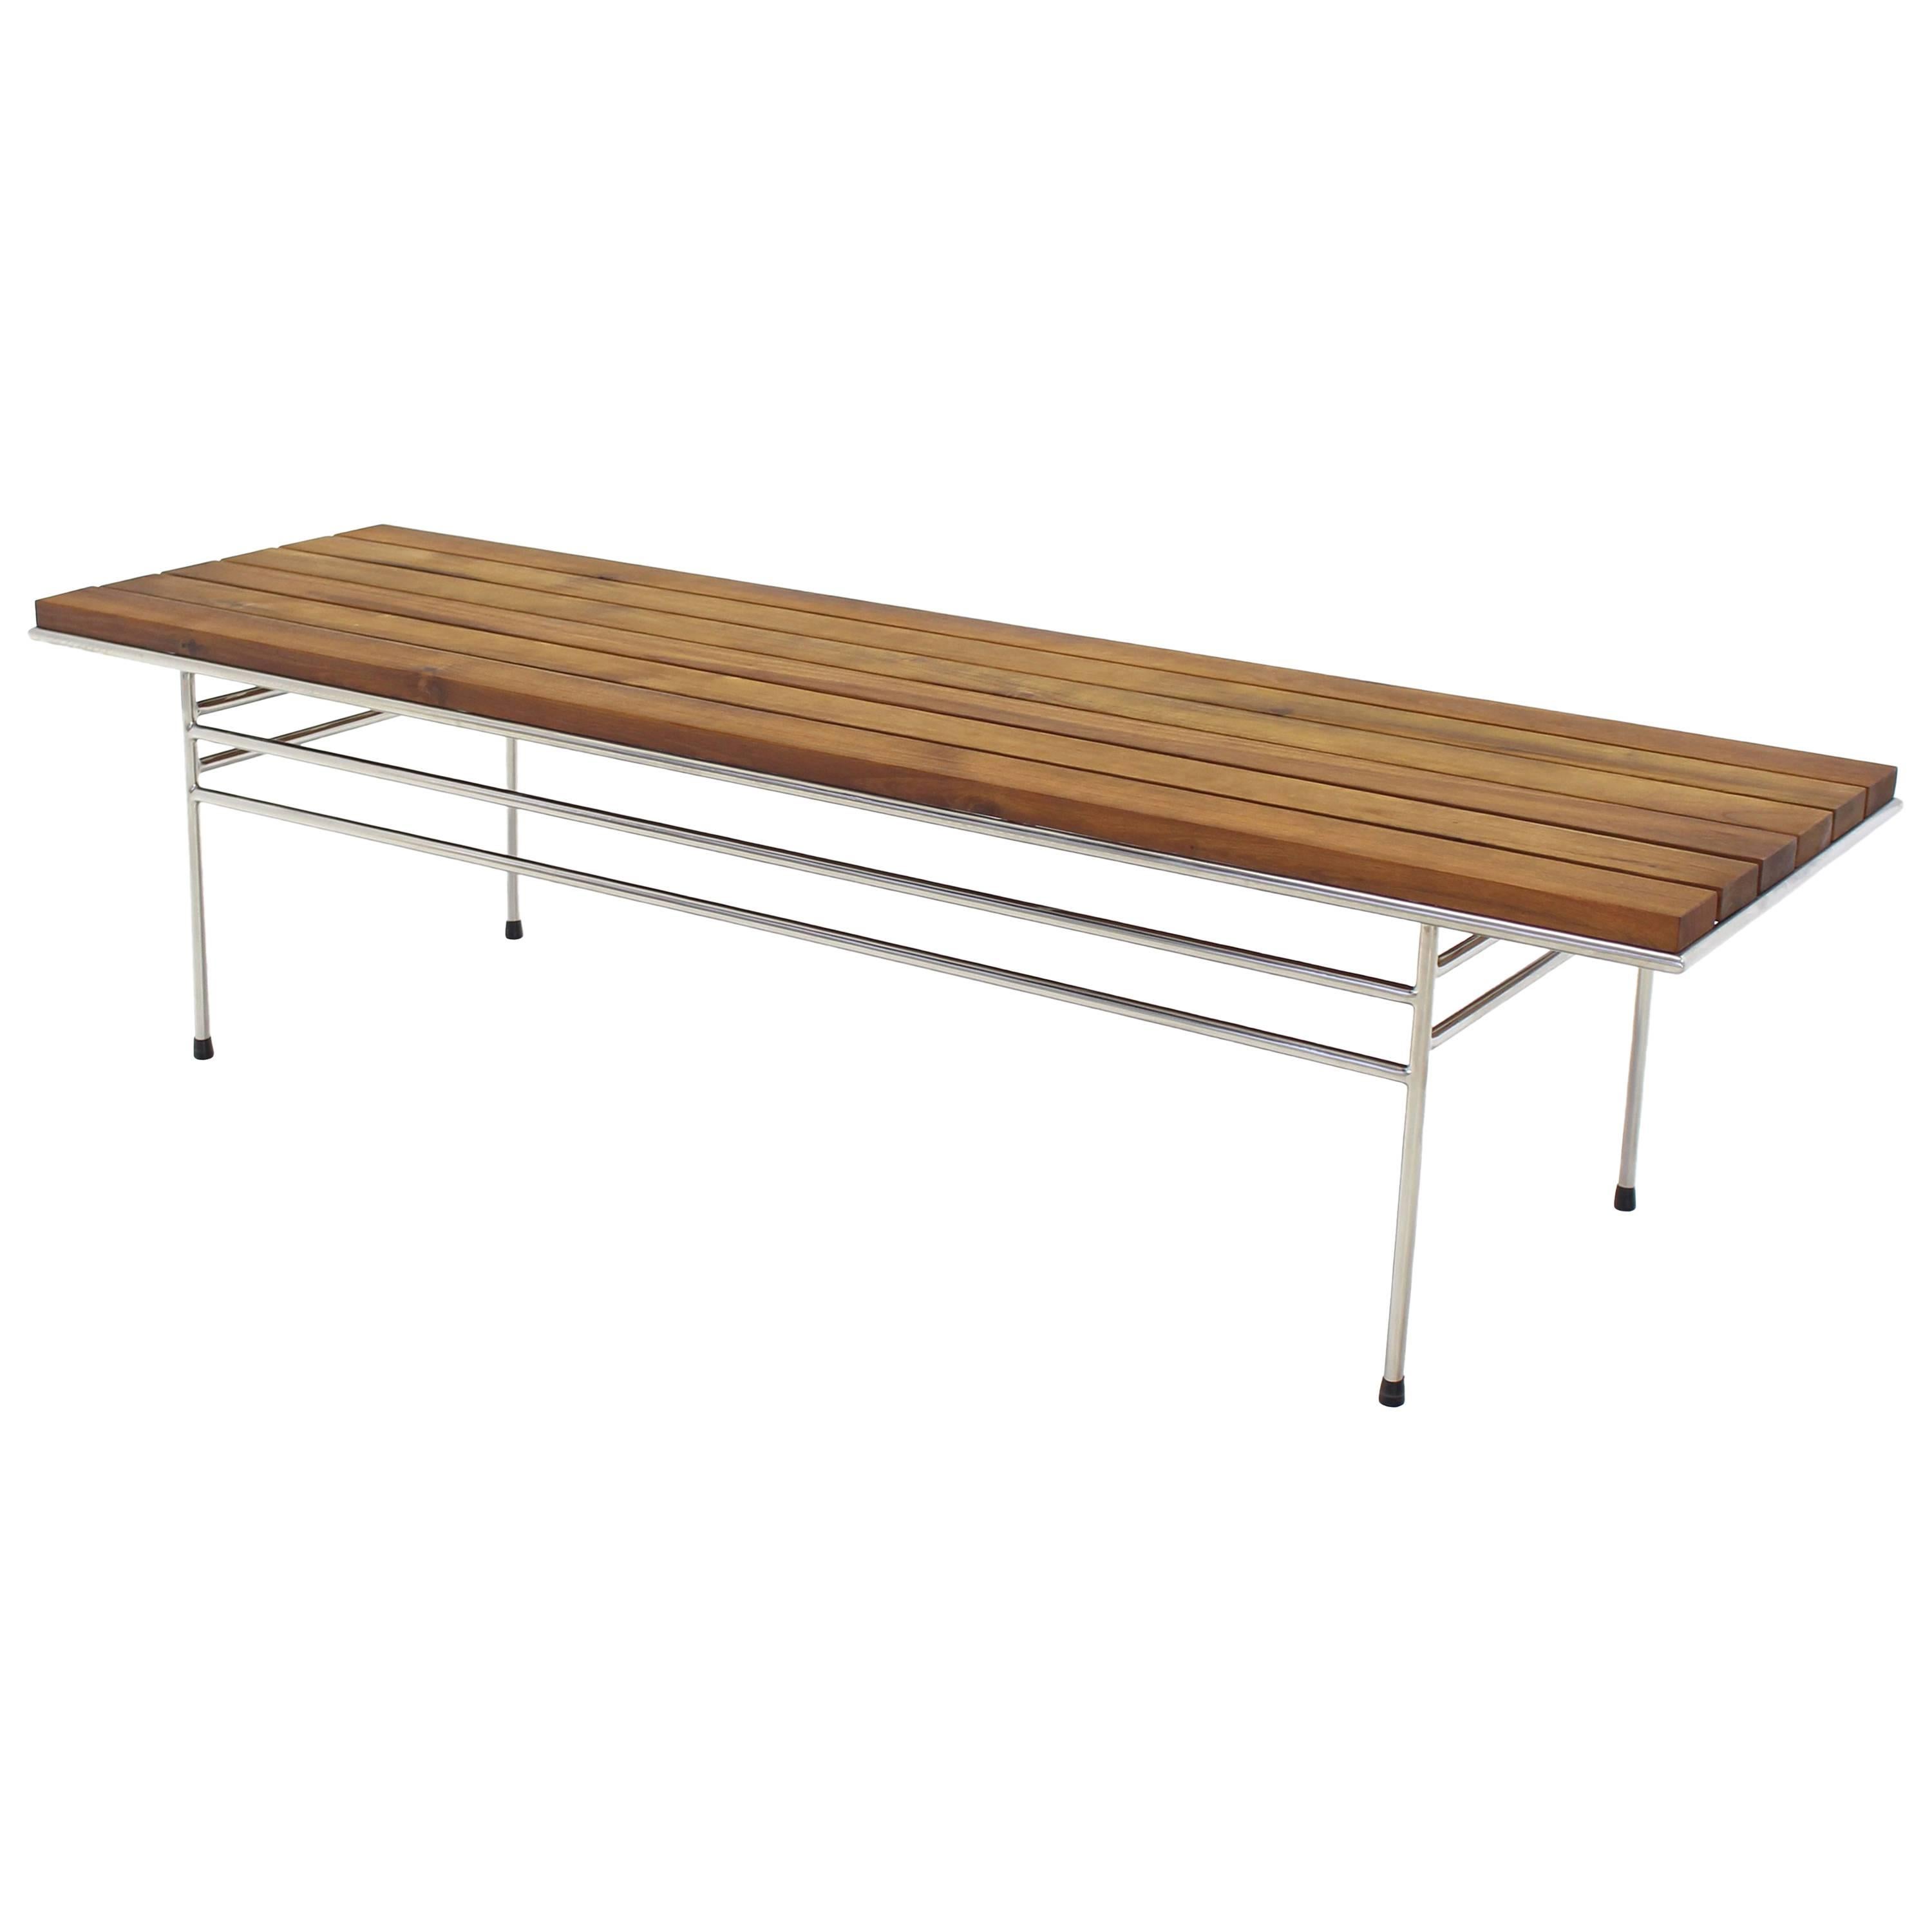 Solid Oiled Slat Wood Top Chrome Bench For Sale